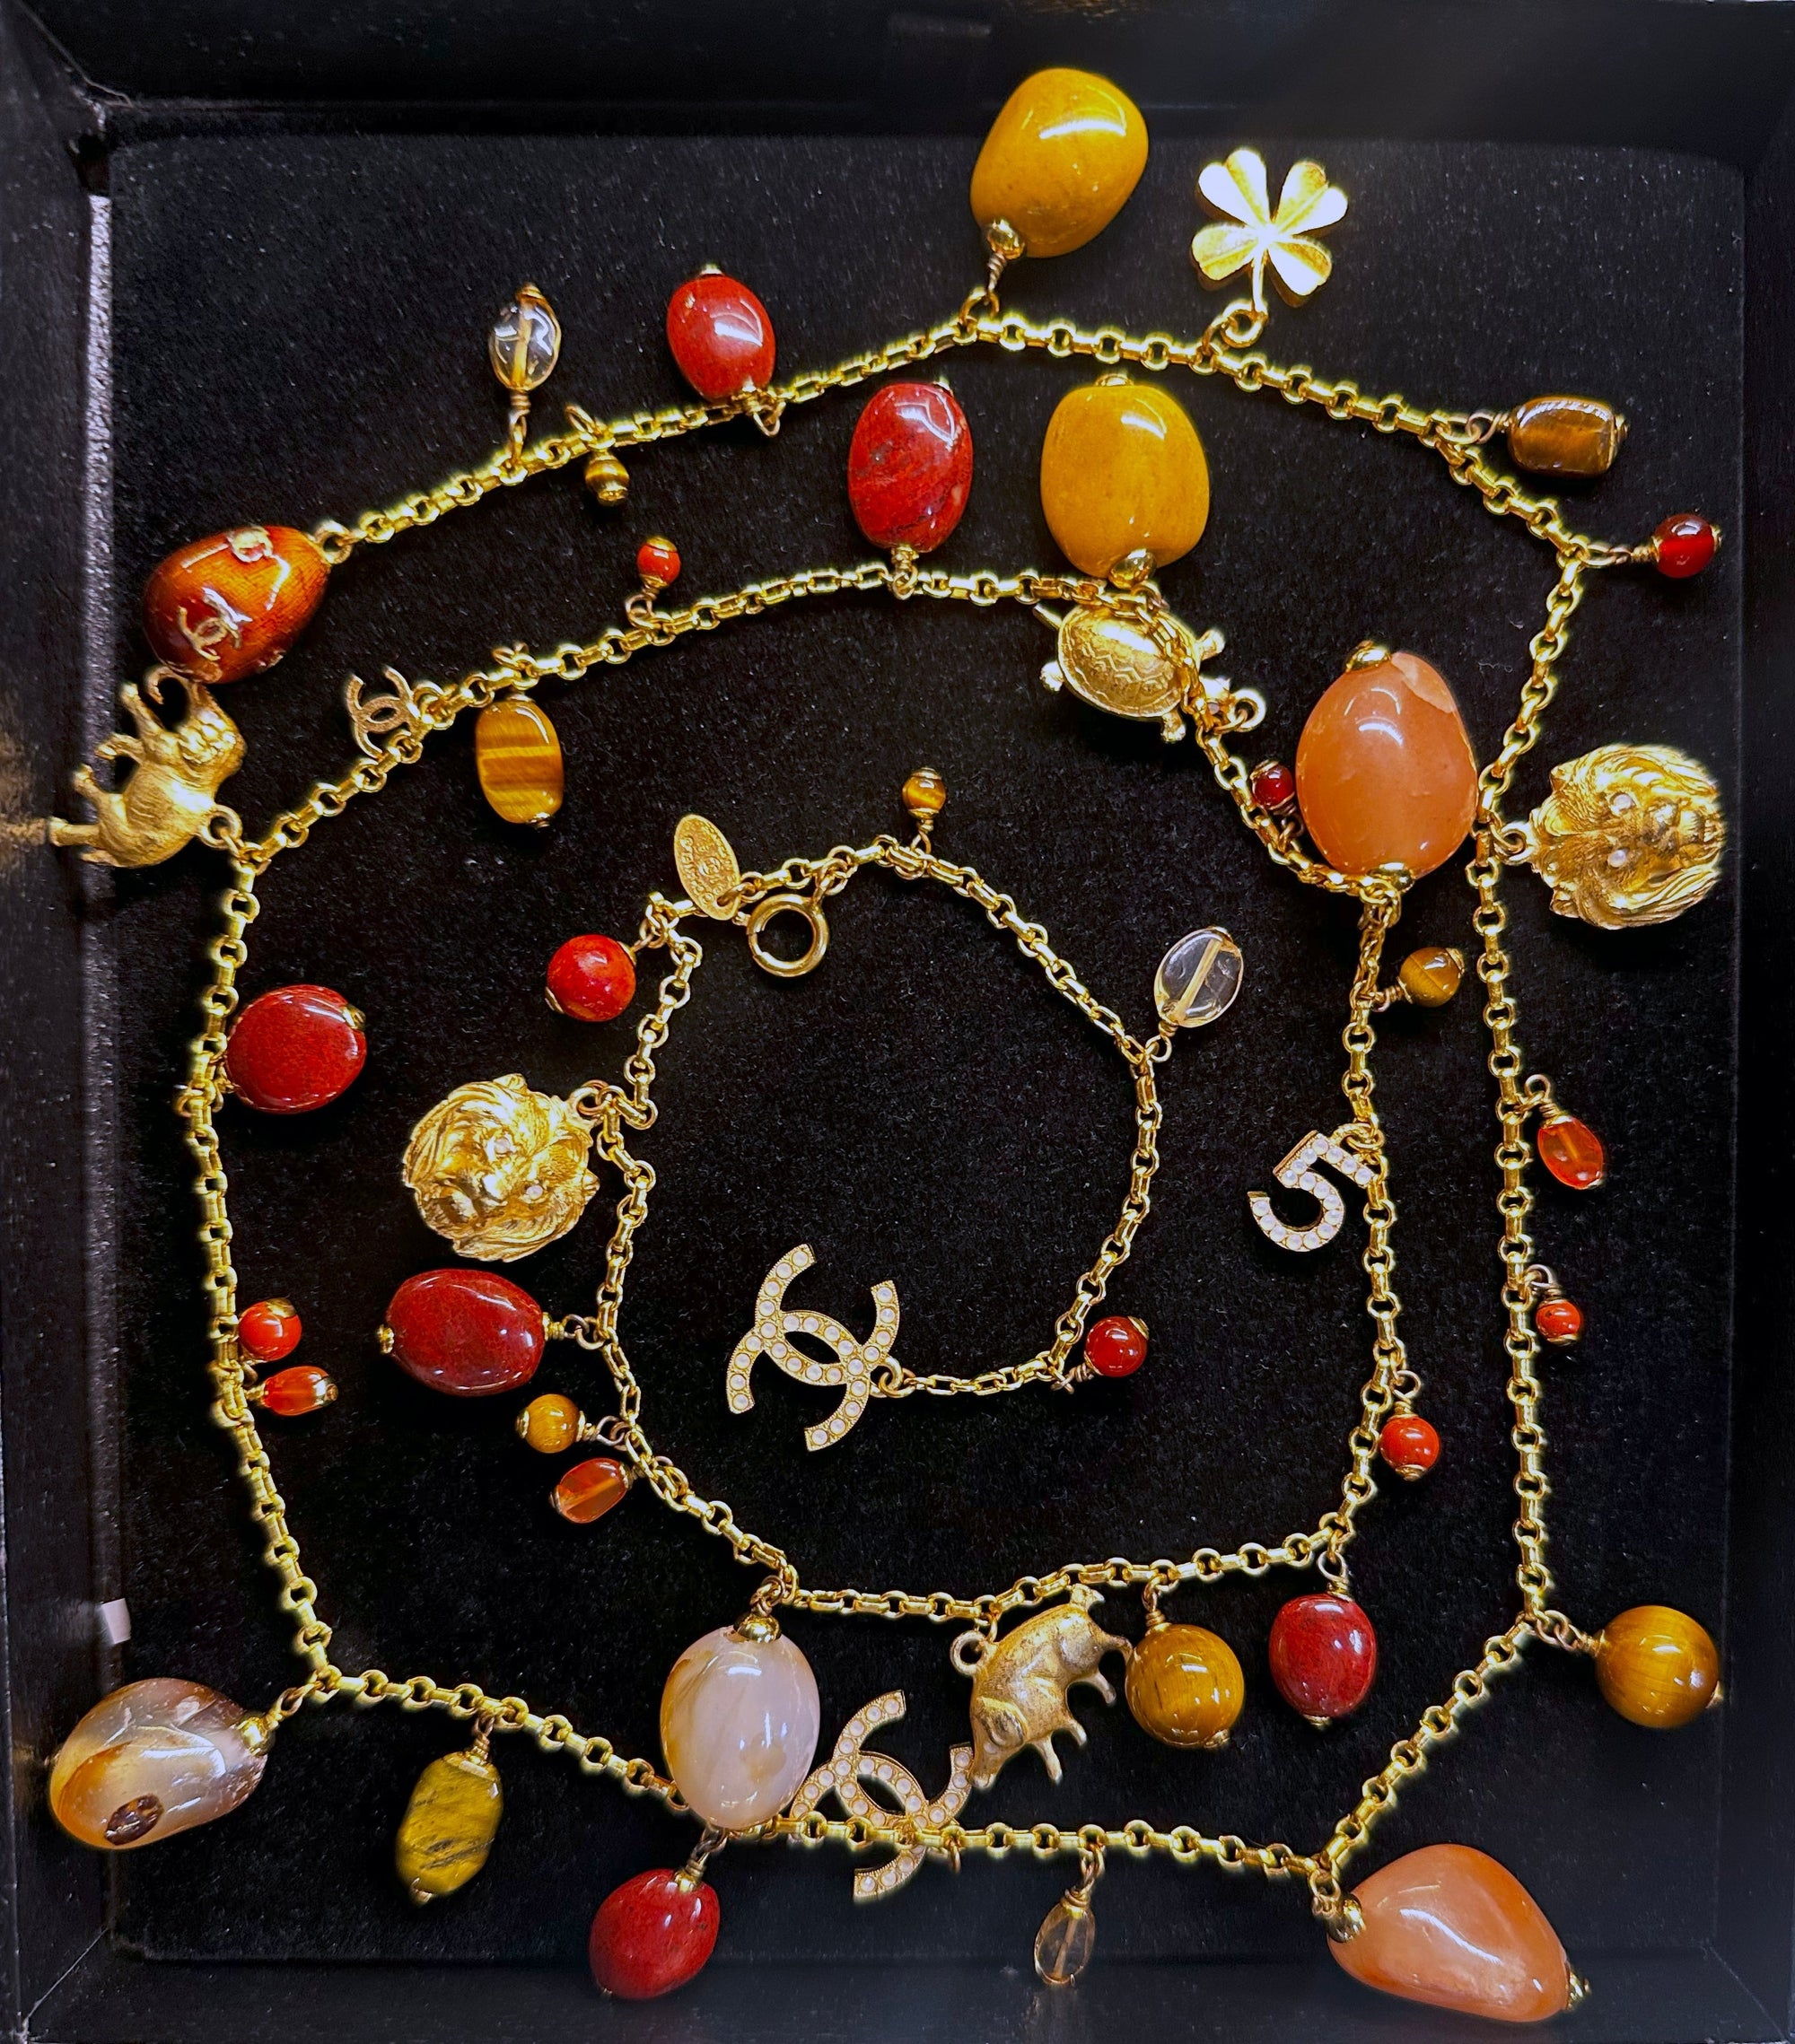 Chanel Animal Charm and Gemstone Bead Necklace 2001